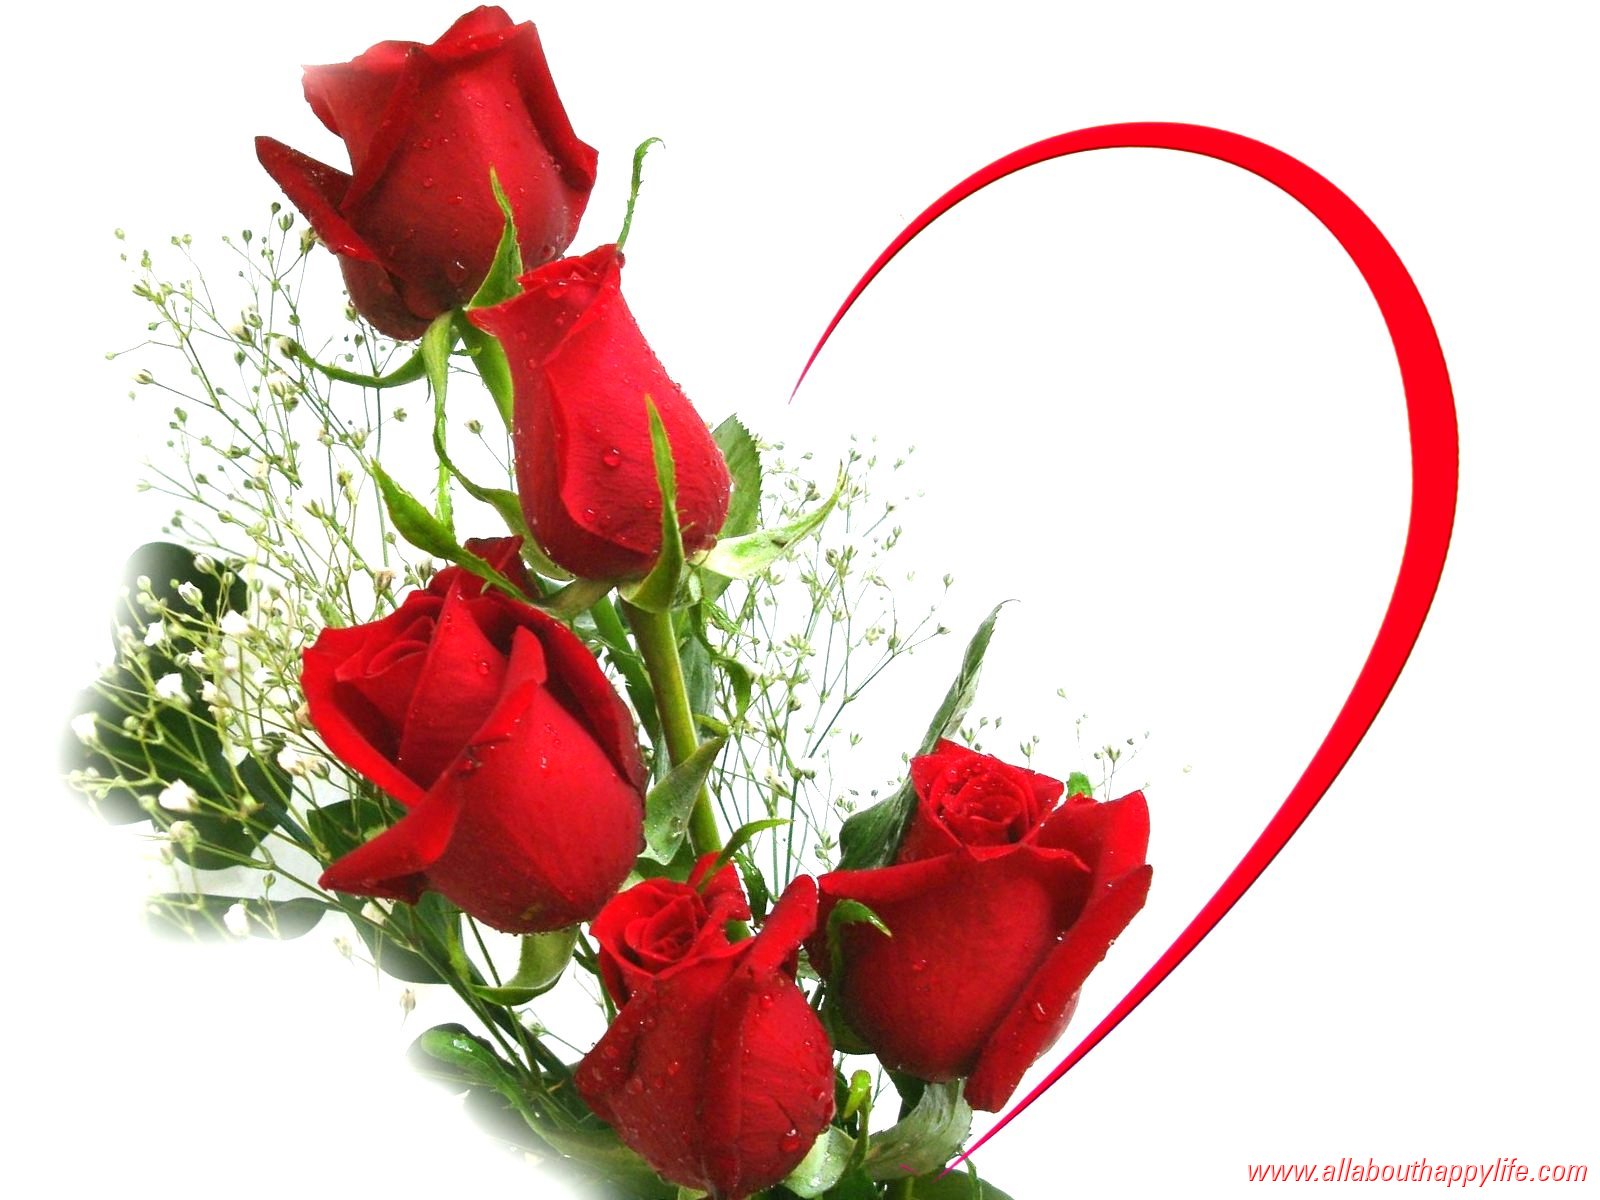 https://www.allabouthappylife.com/wallpapers/love/love-wallpaper-red-roses_dsc03451.jpg